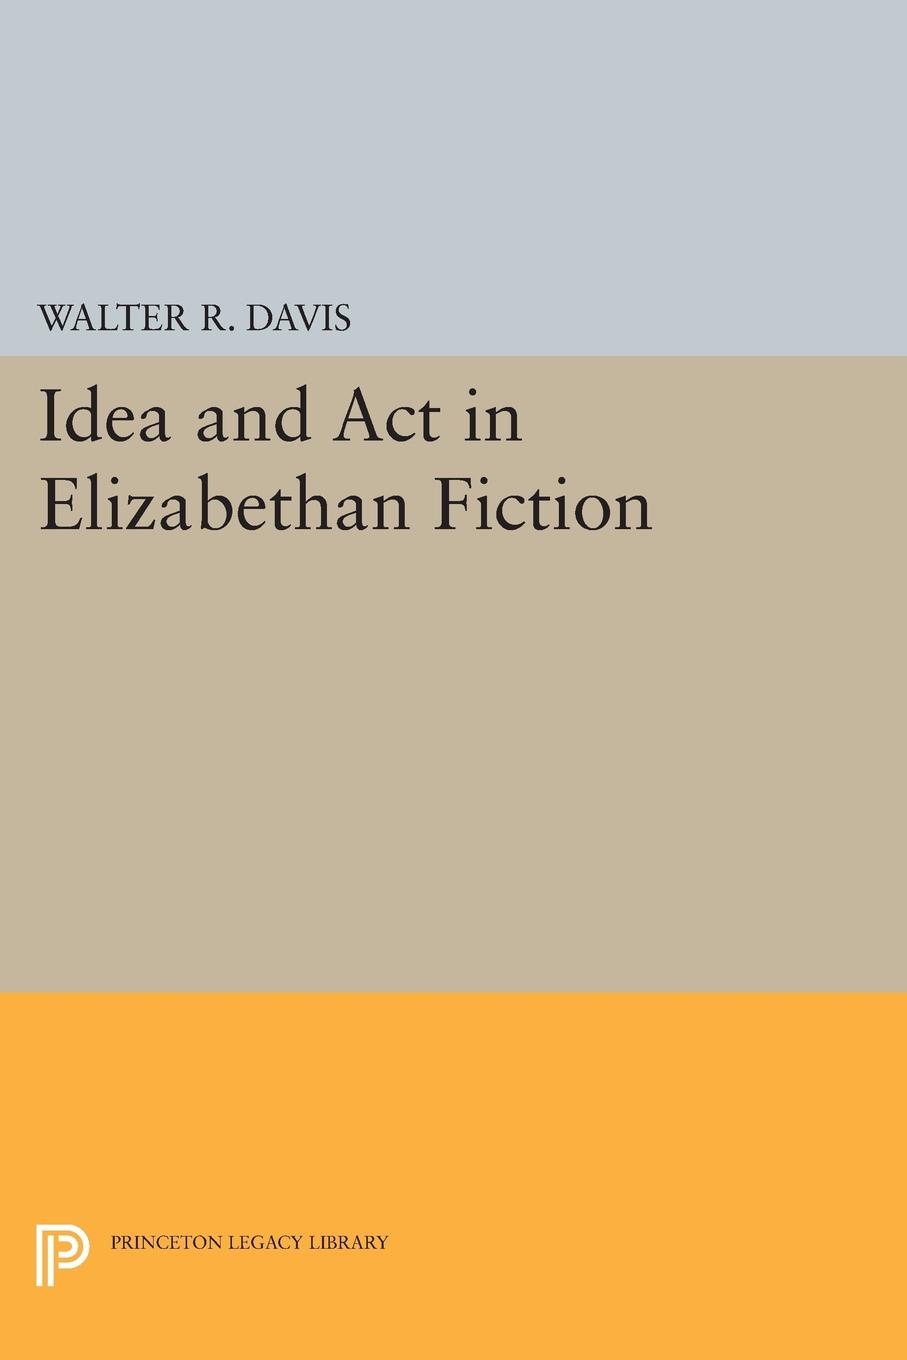 Idea and Act in Elizabethan Fiction